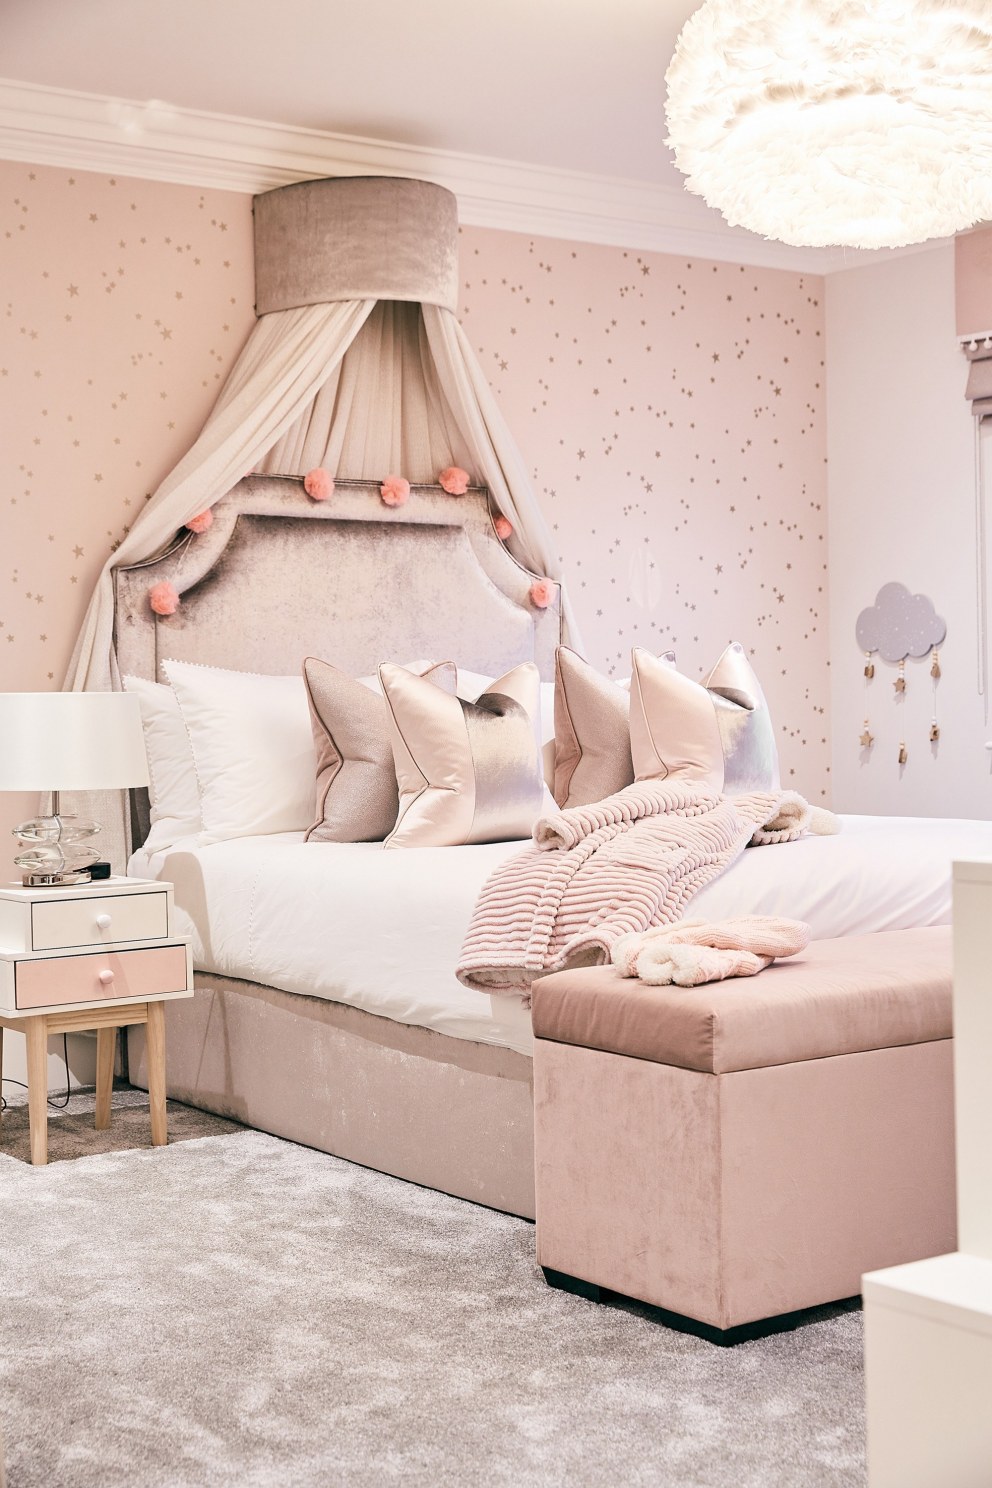 Comfortable luxury - with kids | Young girls dream bedroom | Interior Designers